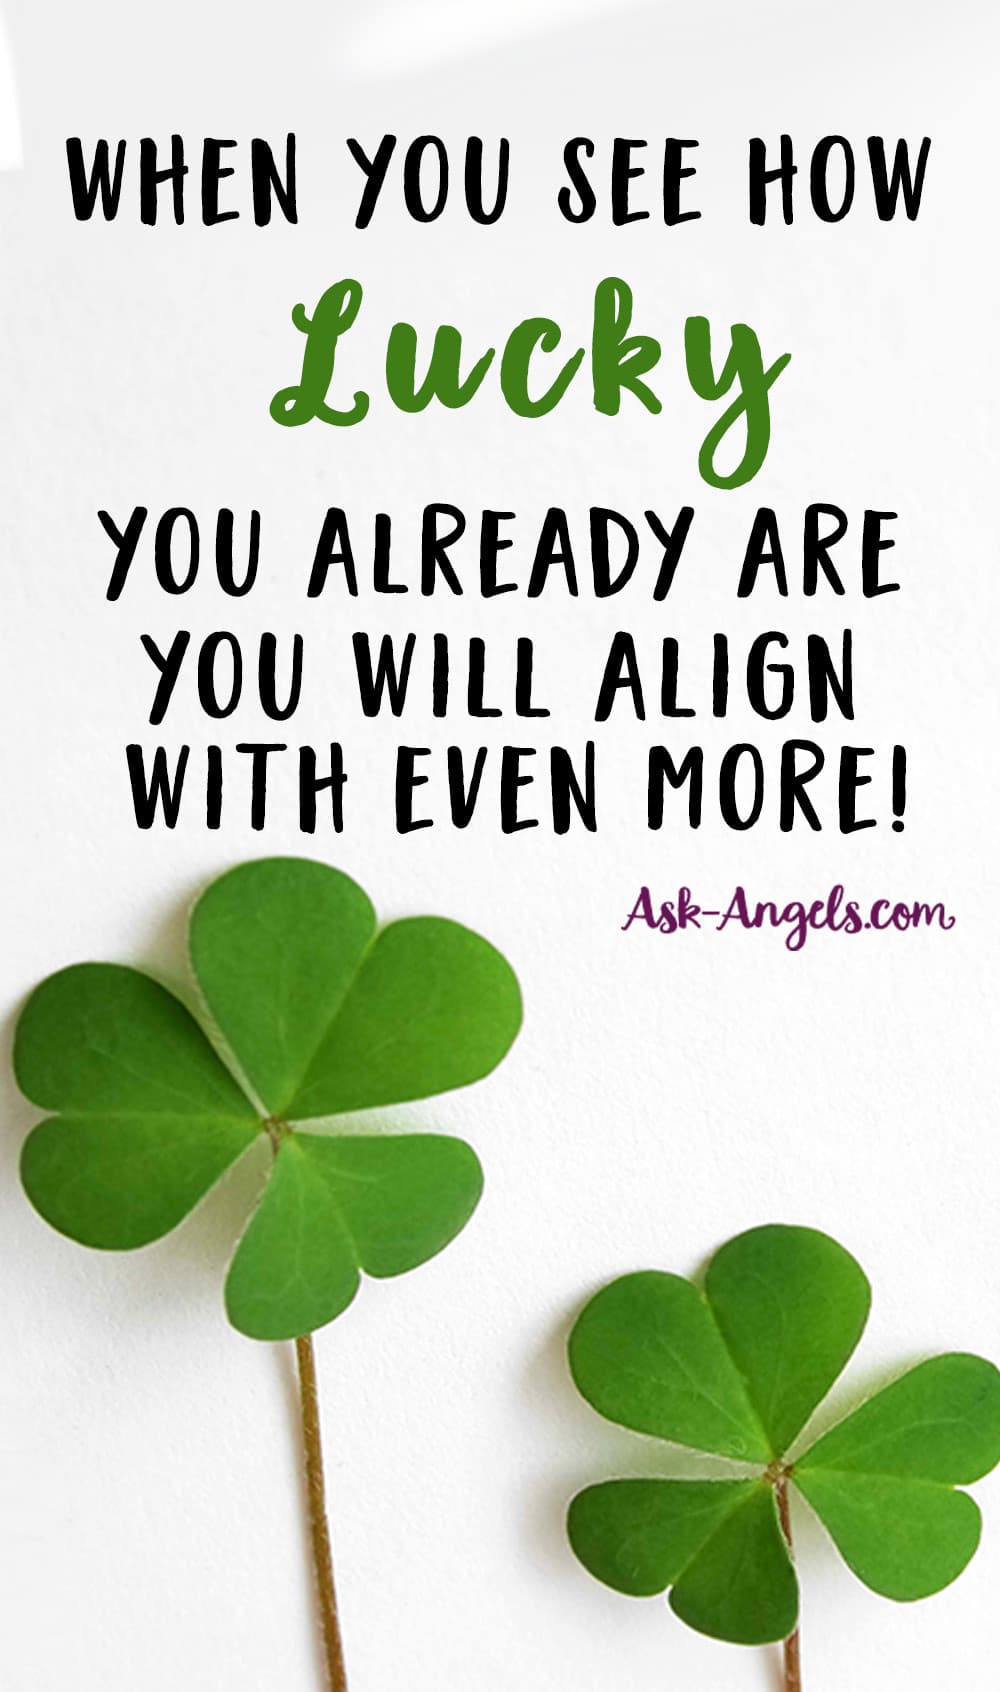 How to Attract Luck